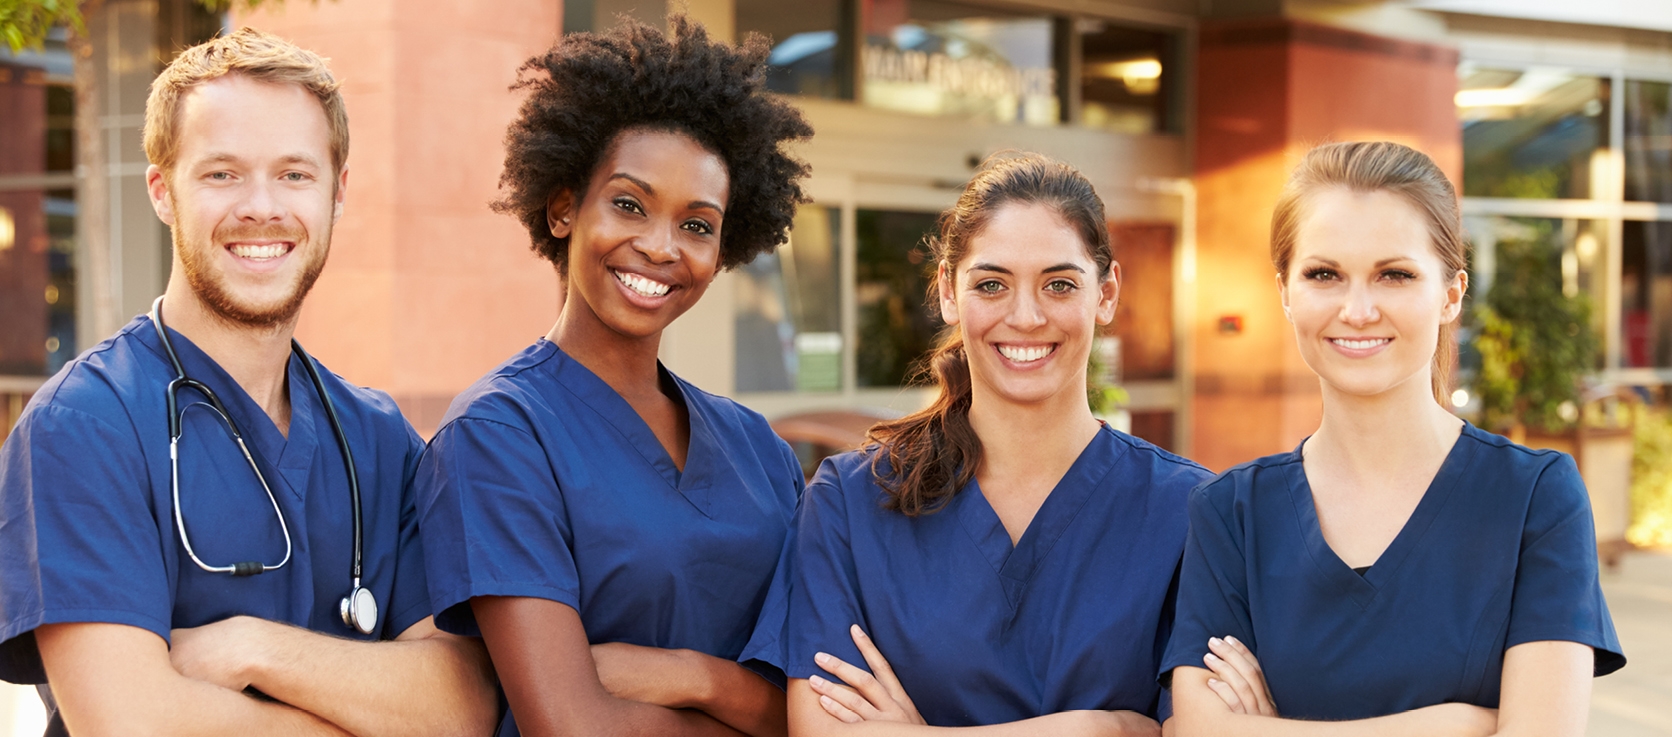 Diverse group of male and female nurses standing and smiling